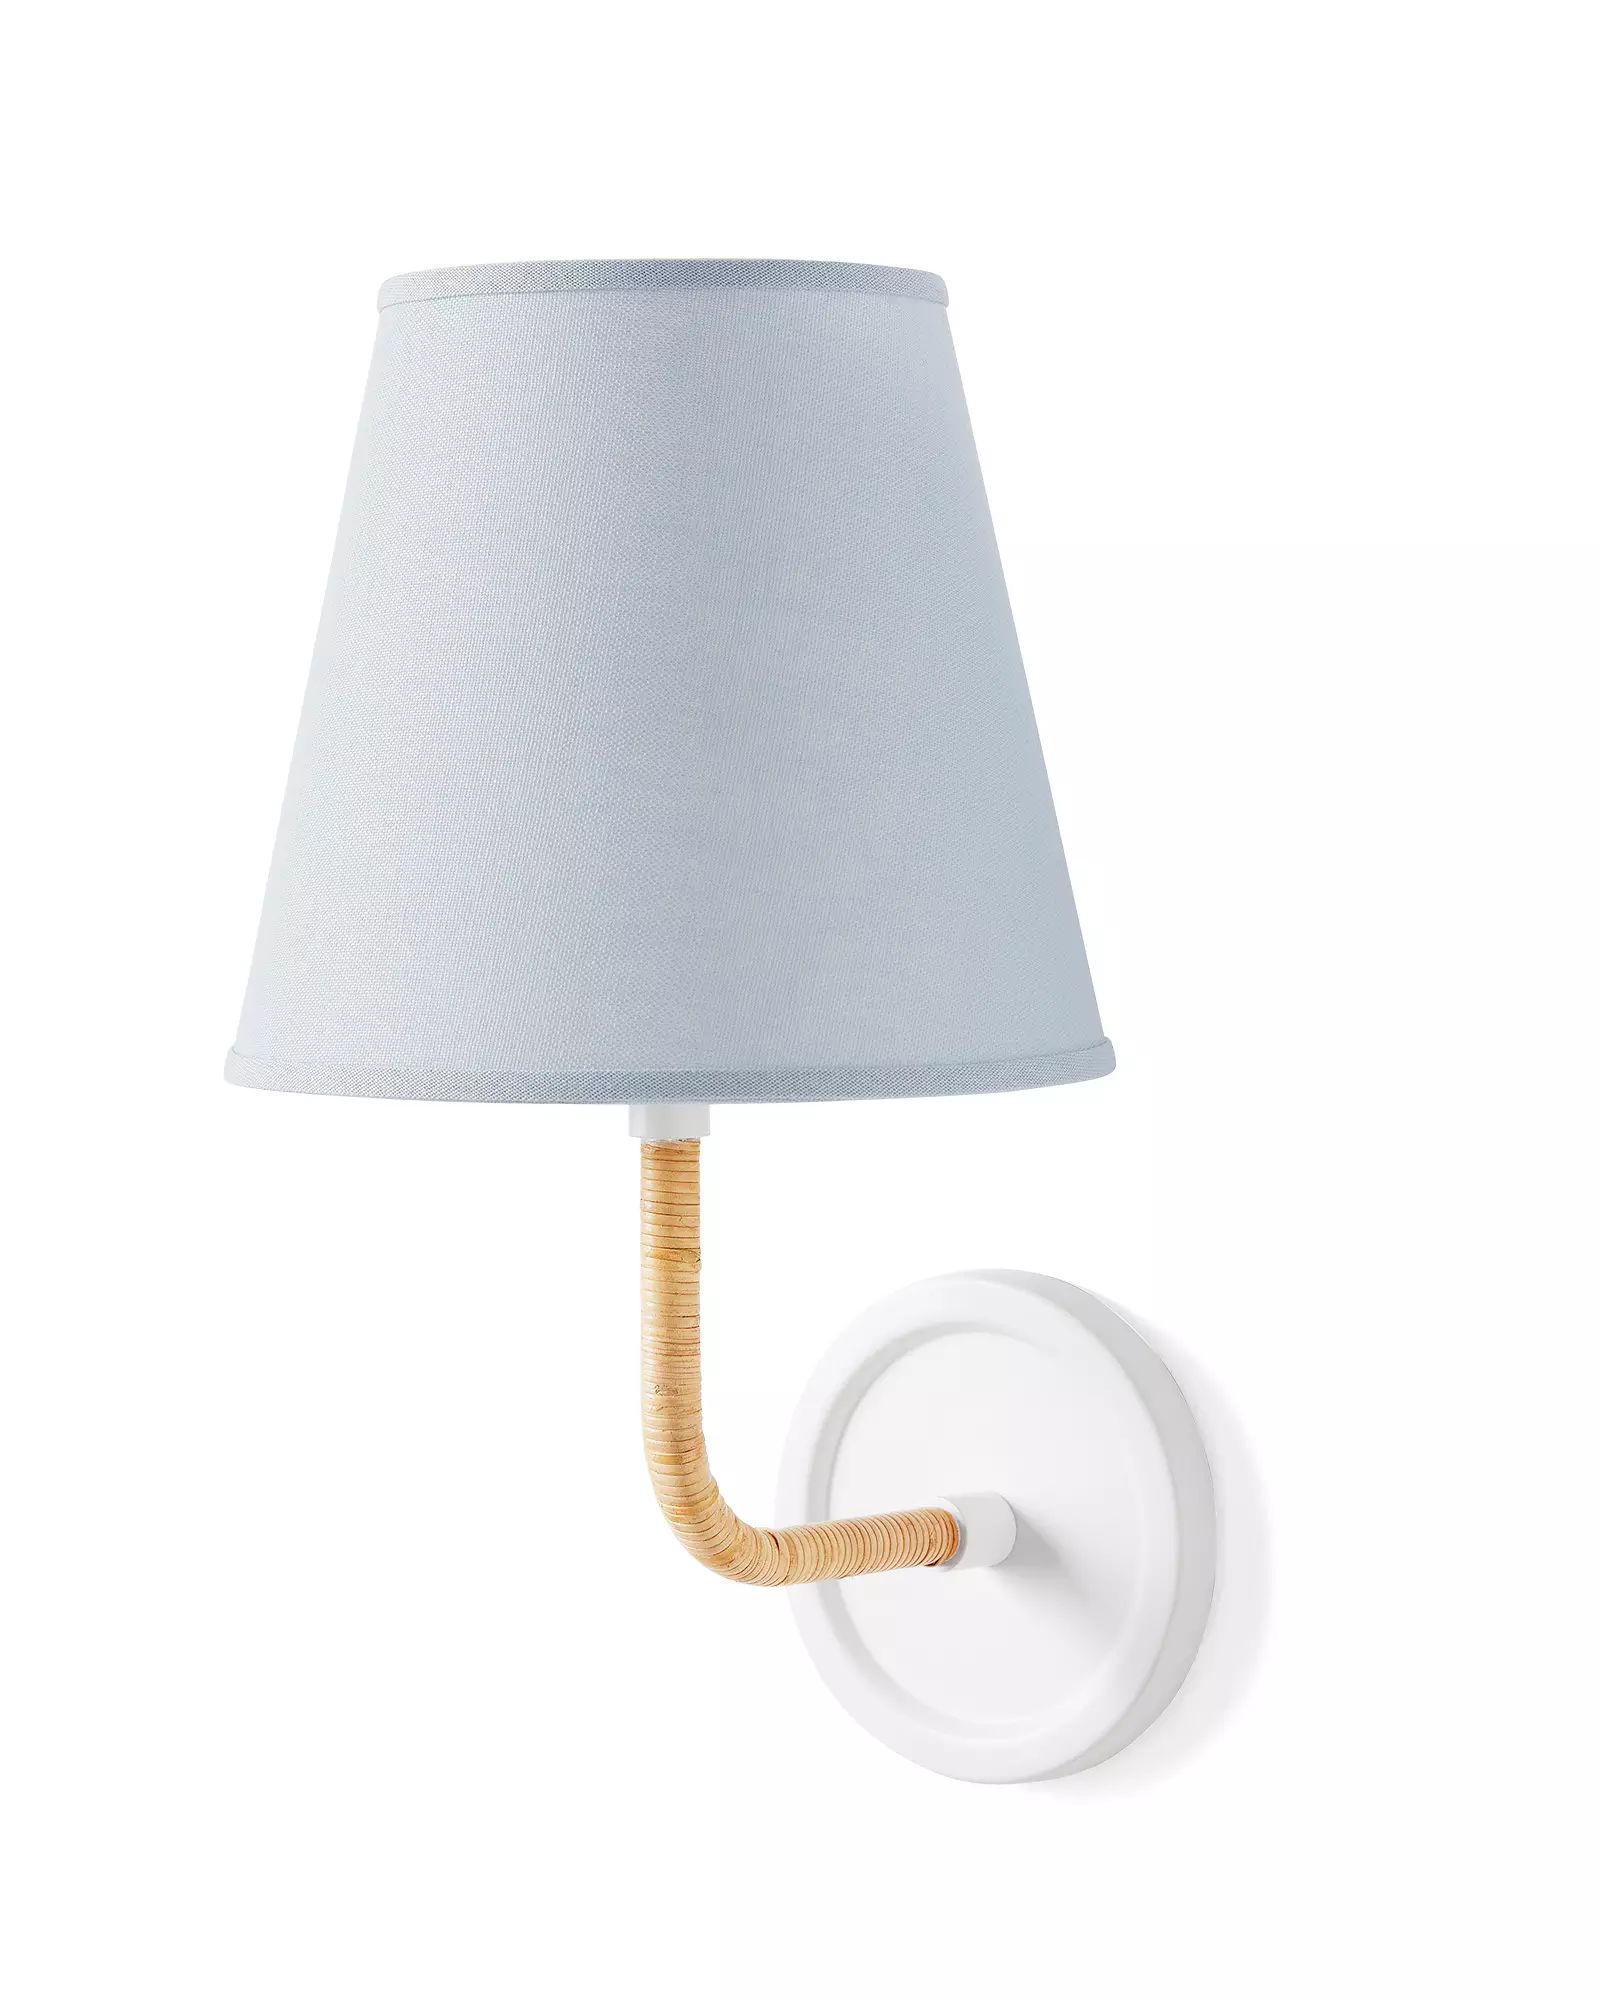 Larkspur Petite Lamps Shade Only | Serena and Lily